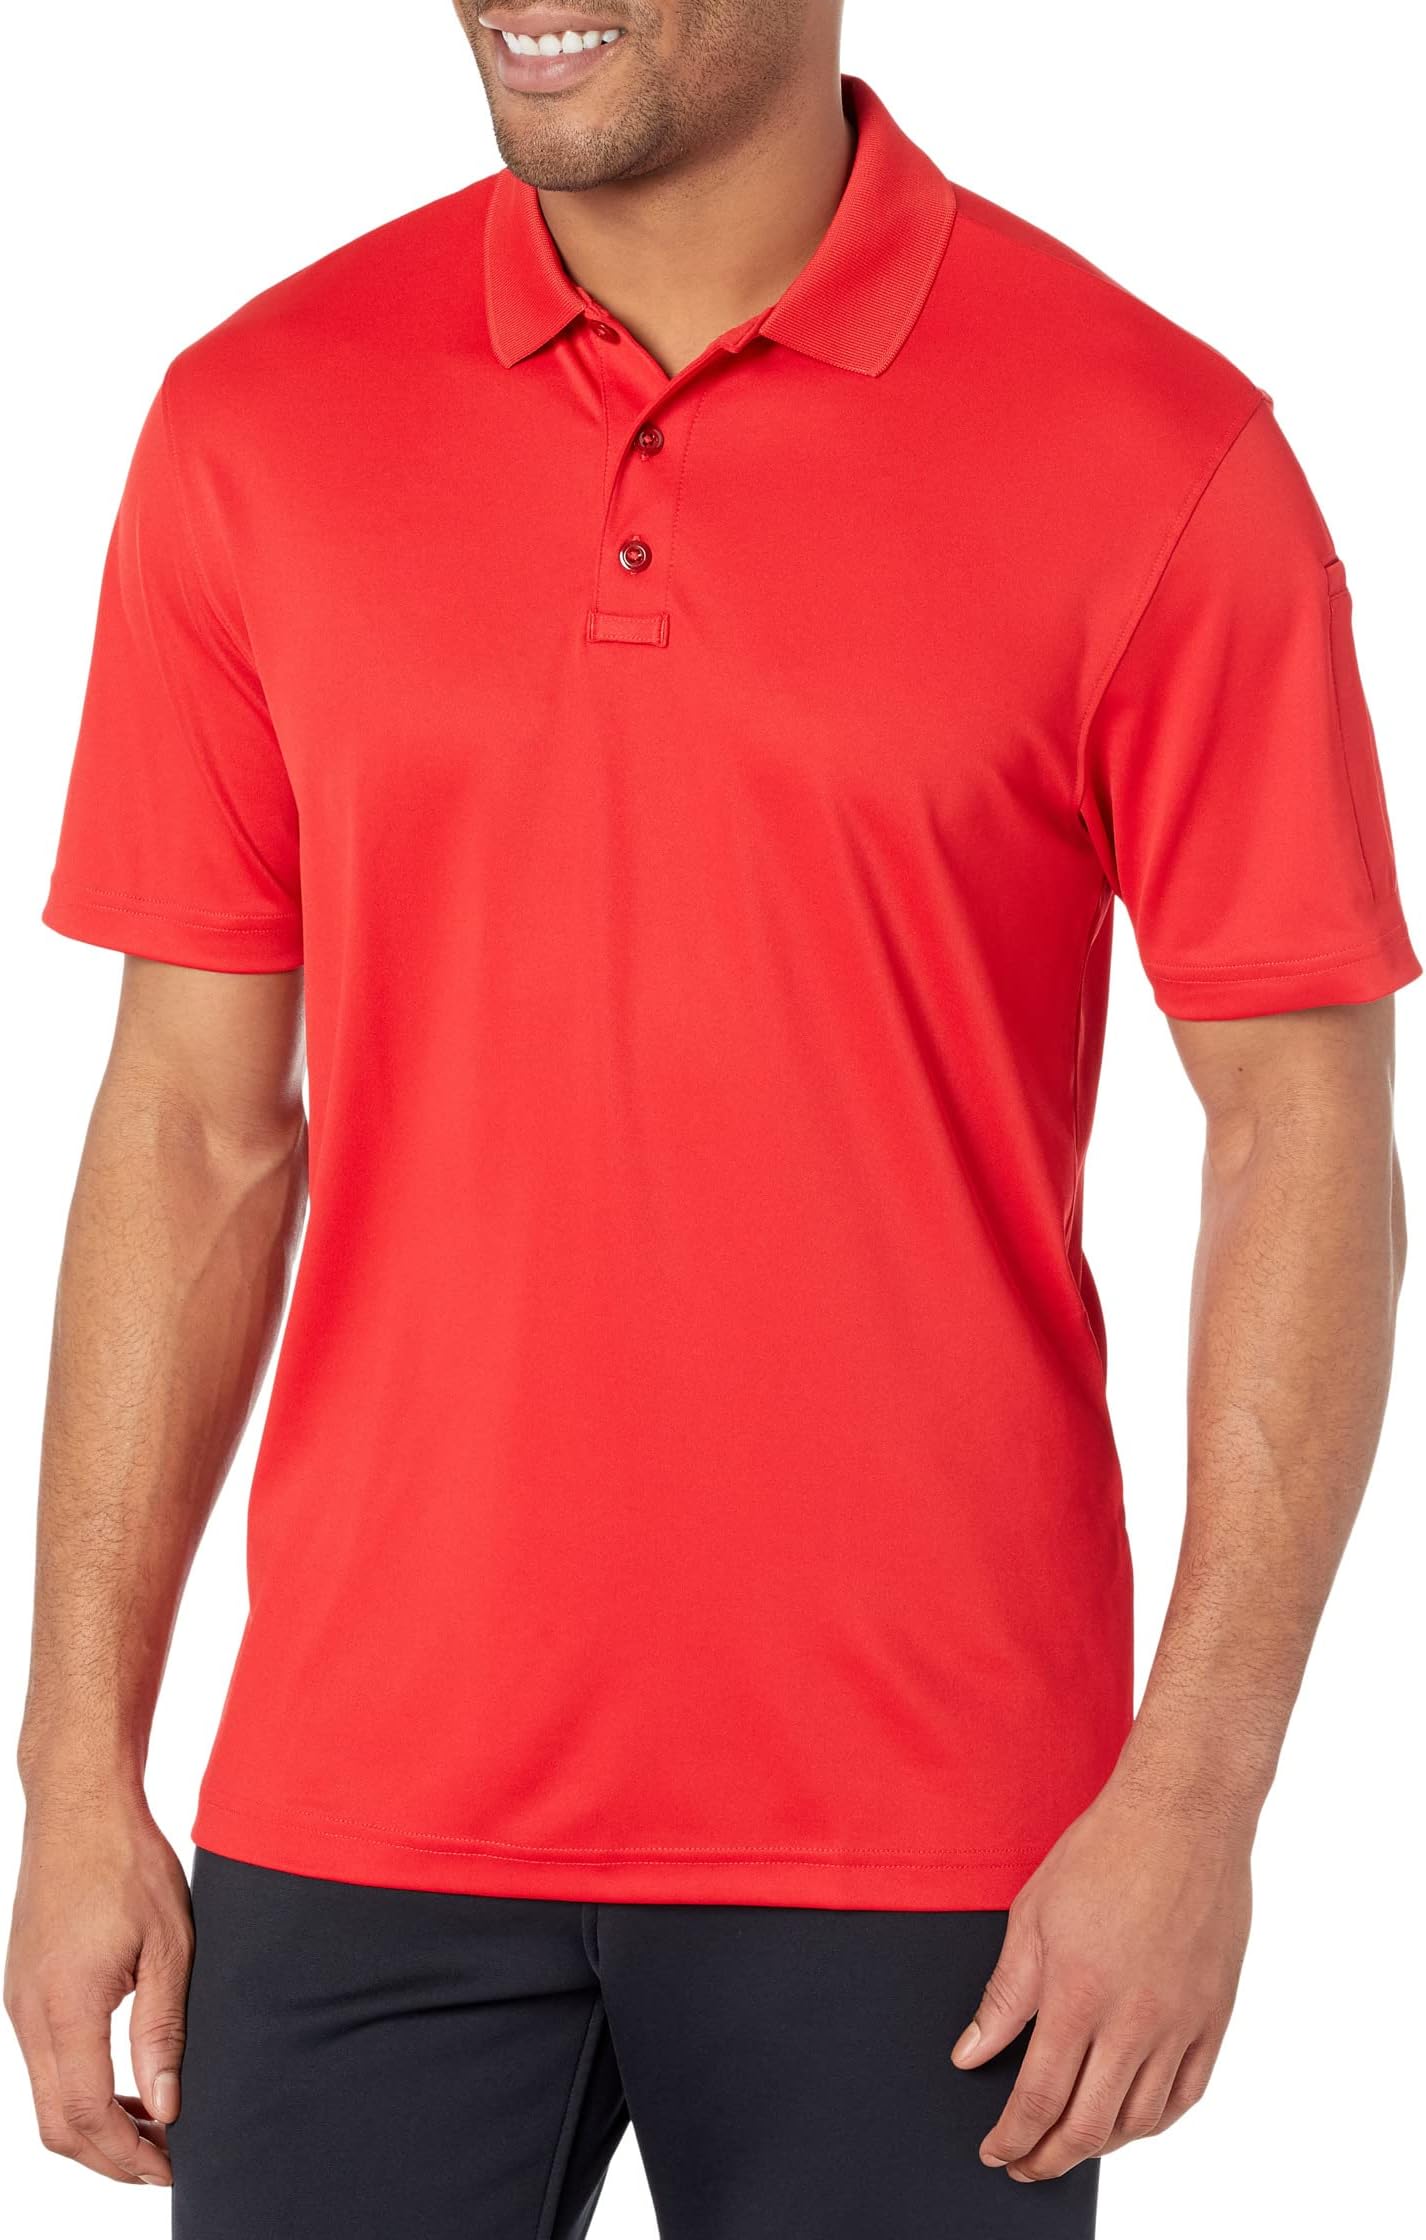 Tac Performance Polo 2.0 Under Armour, цвет Red/Red lynch scott red seas under red skies